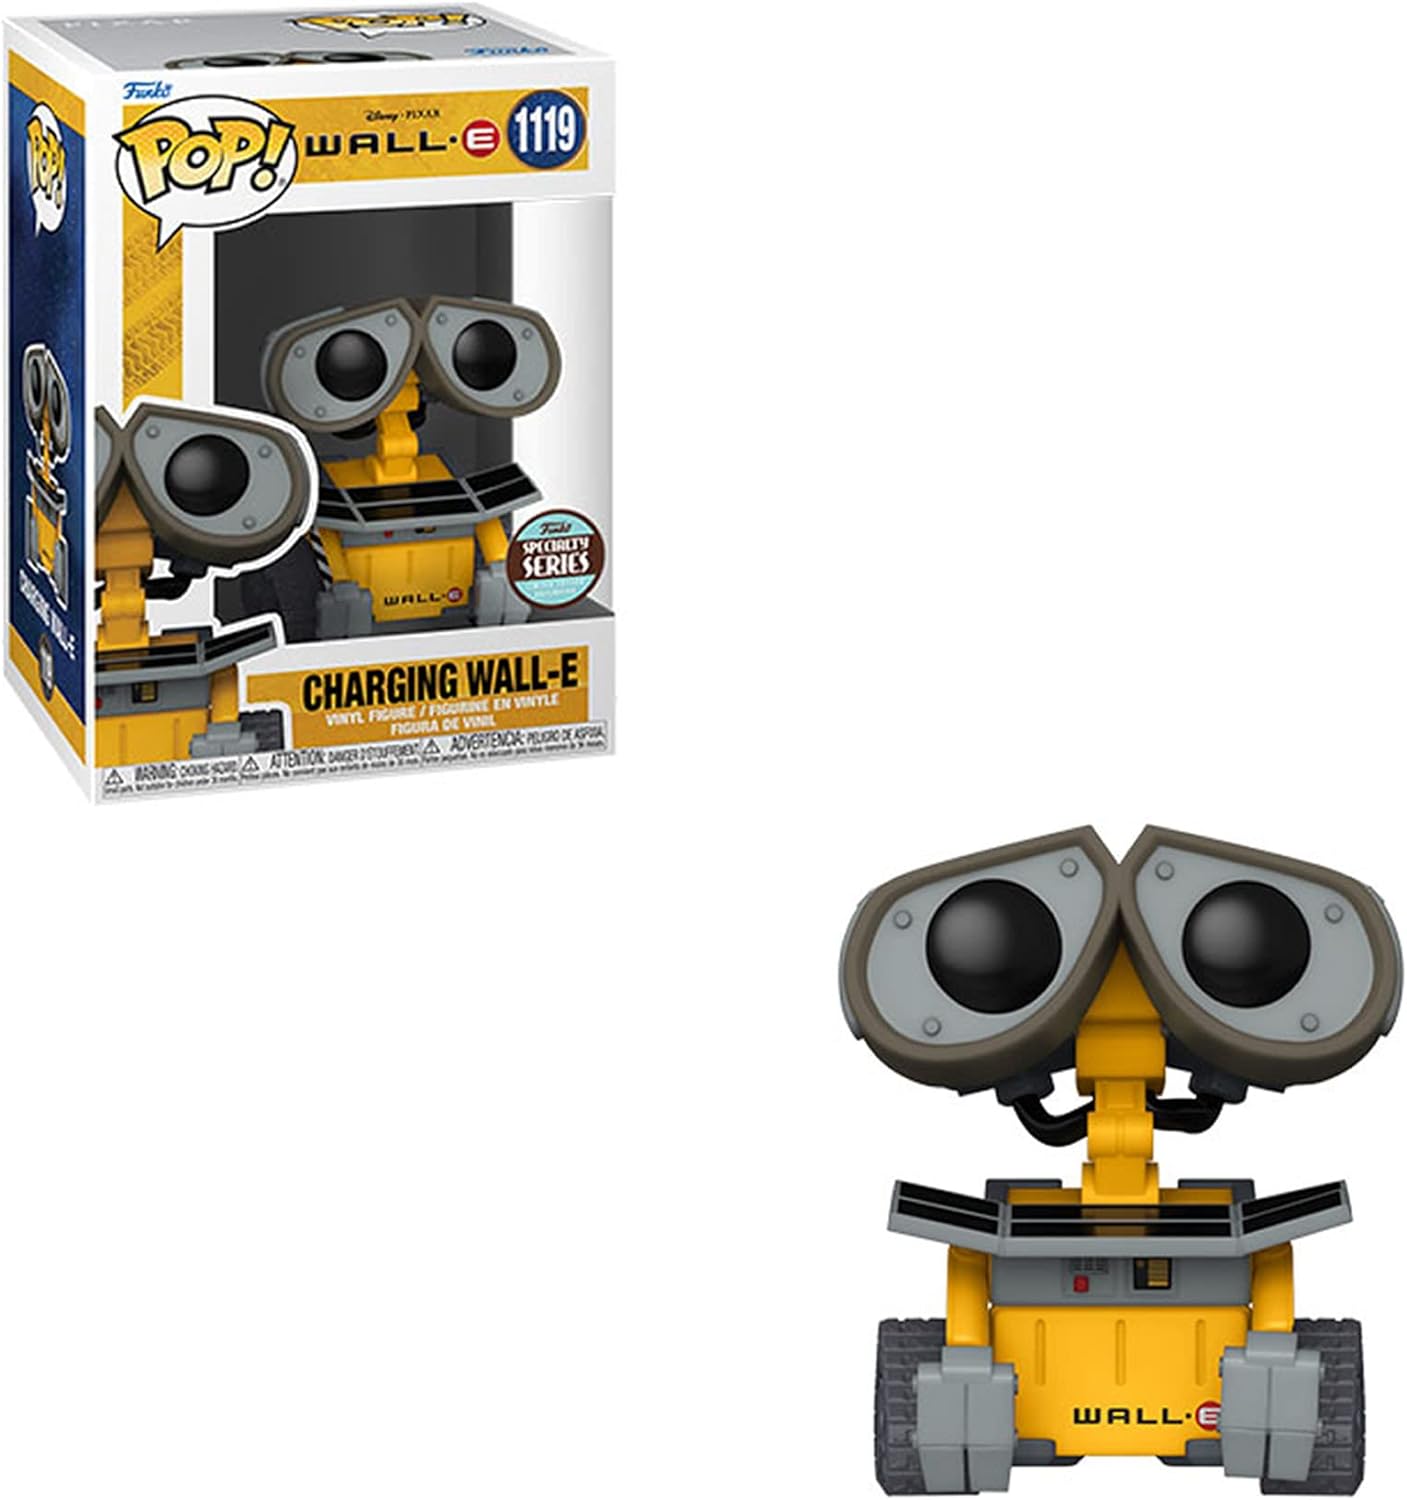 Wall-E Specialty Series Charging Wall-E Funko Pop #1119